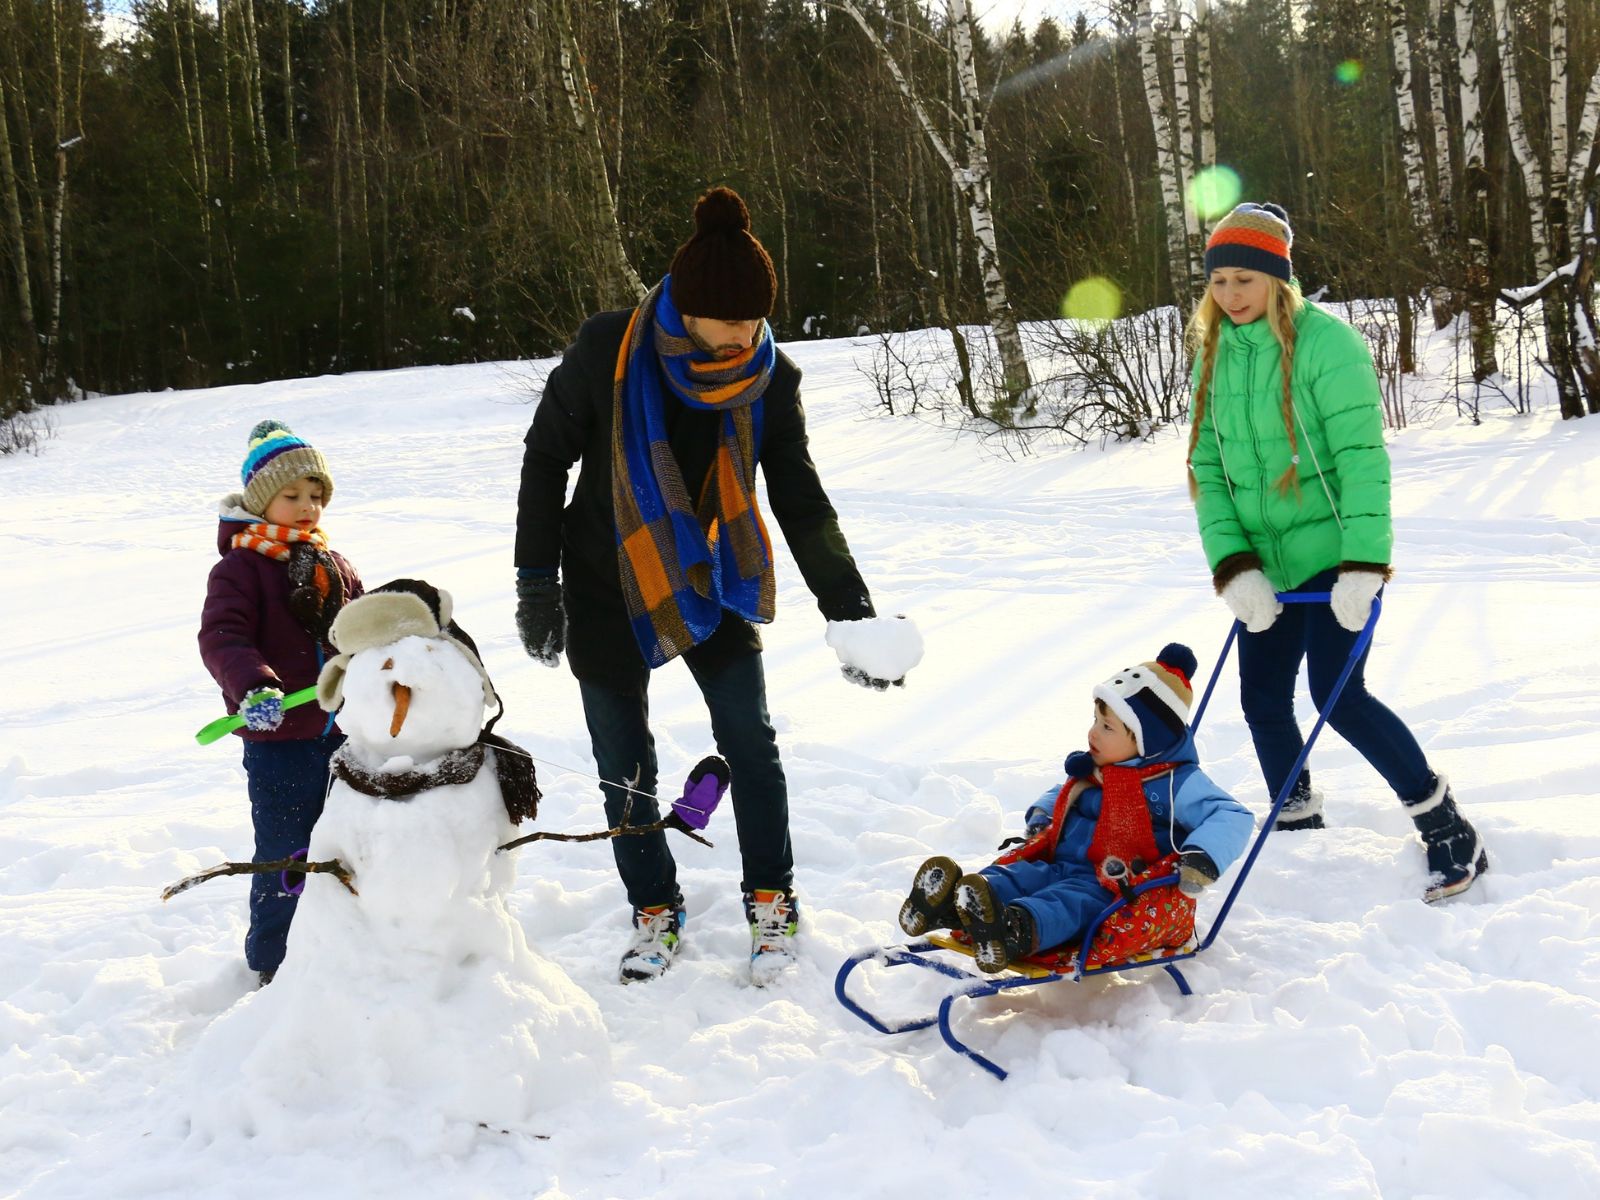 Two adults and two children in winter-wear playing in the snow making snowballs and a snowman.